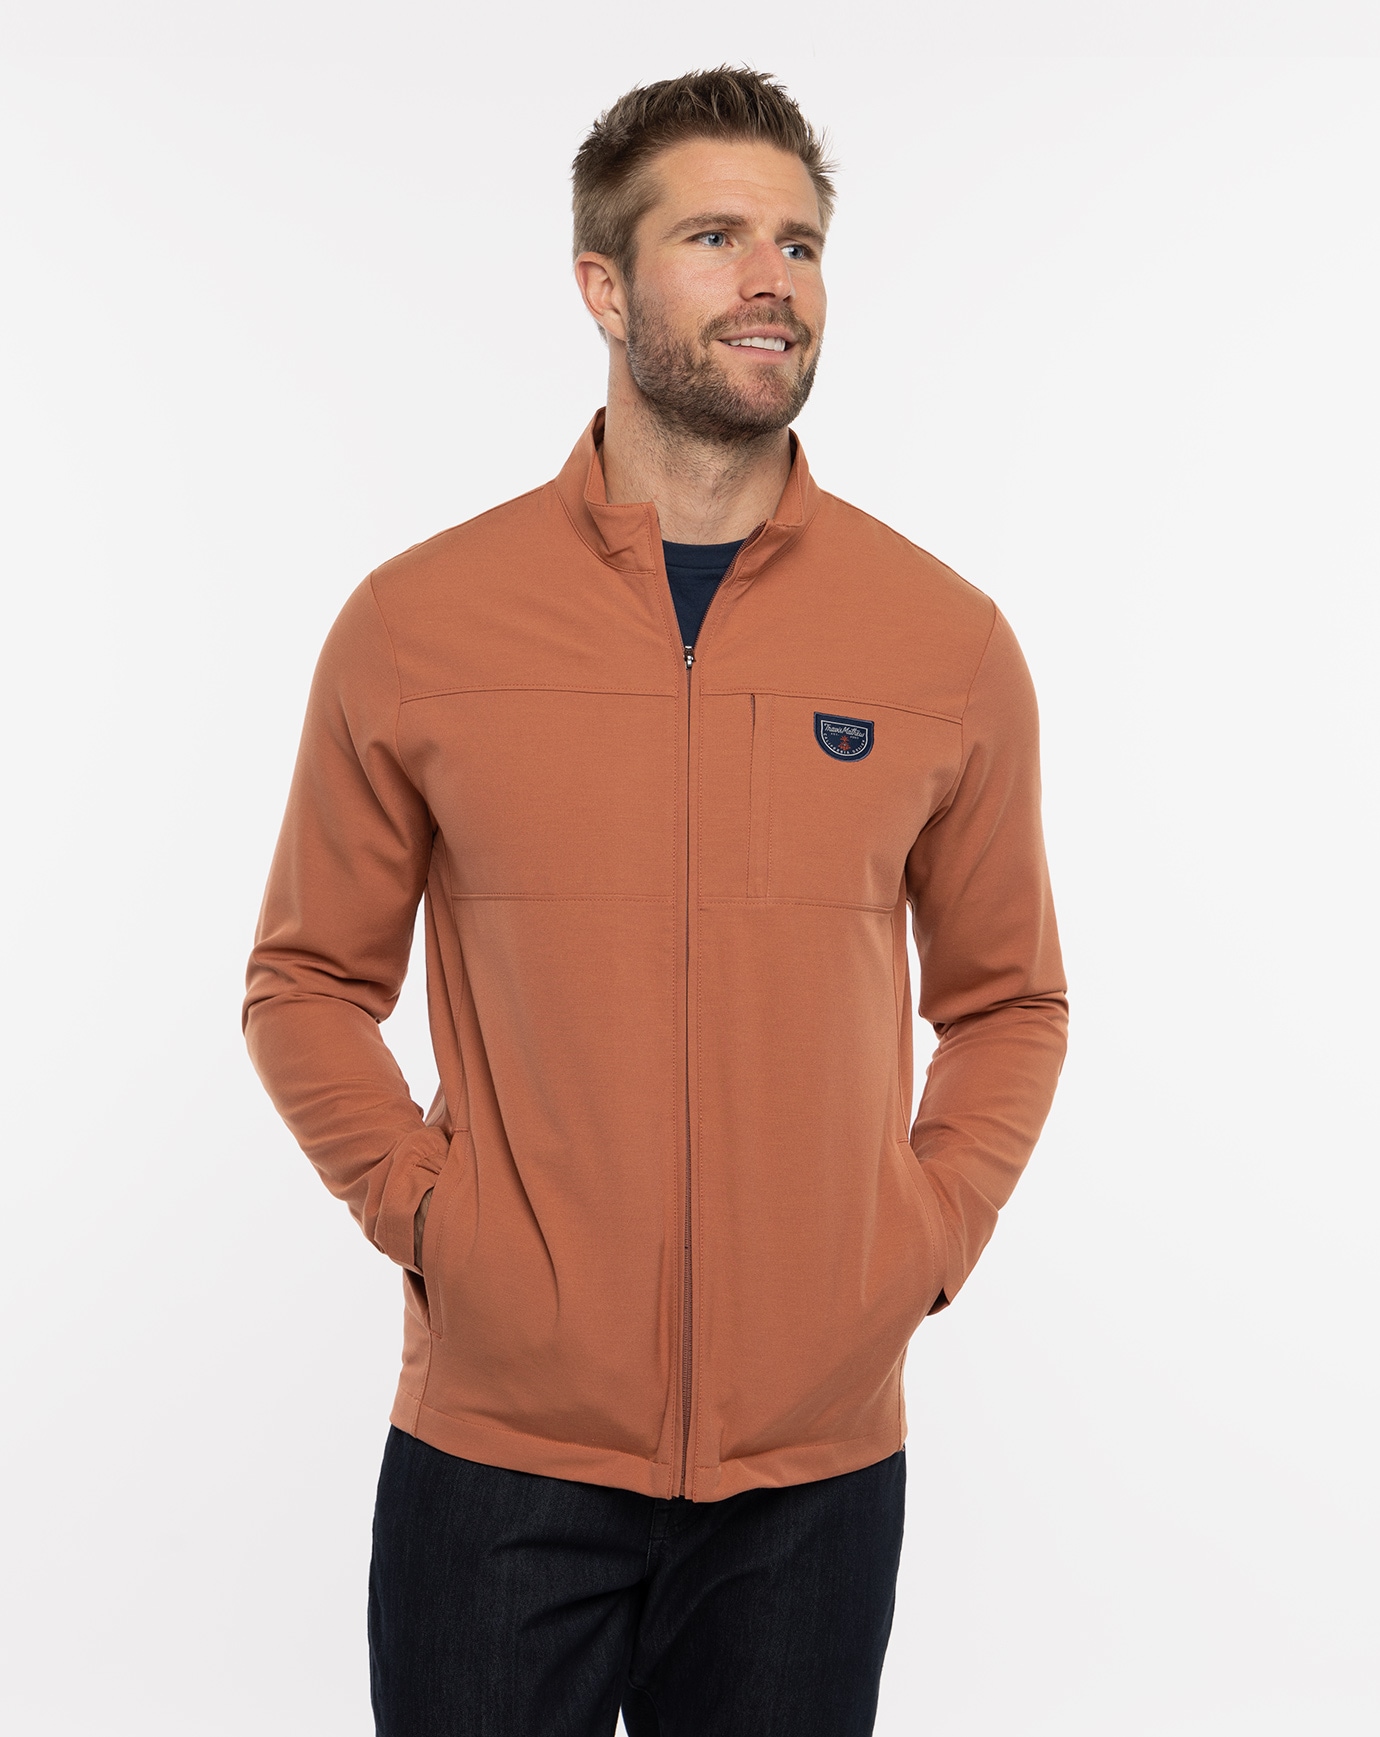 Related Product - QUICK CALL FULL ZIP